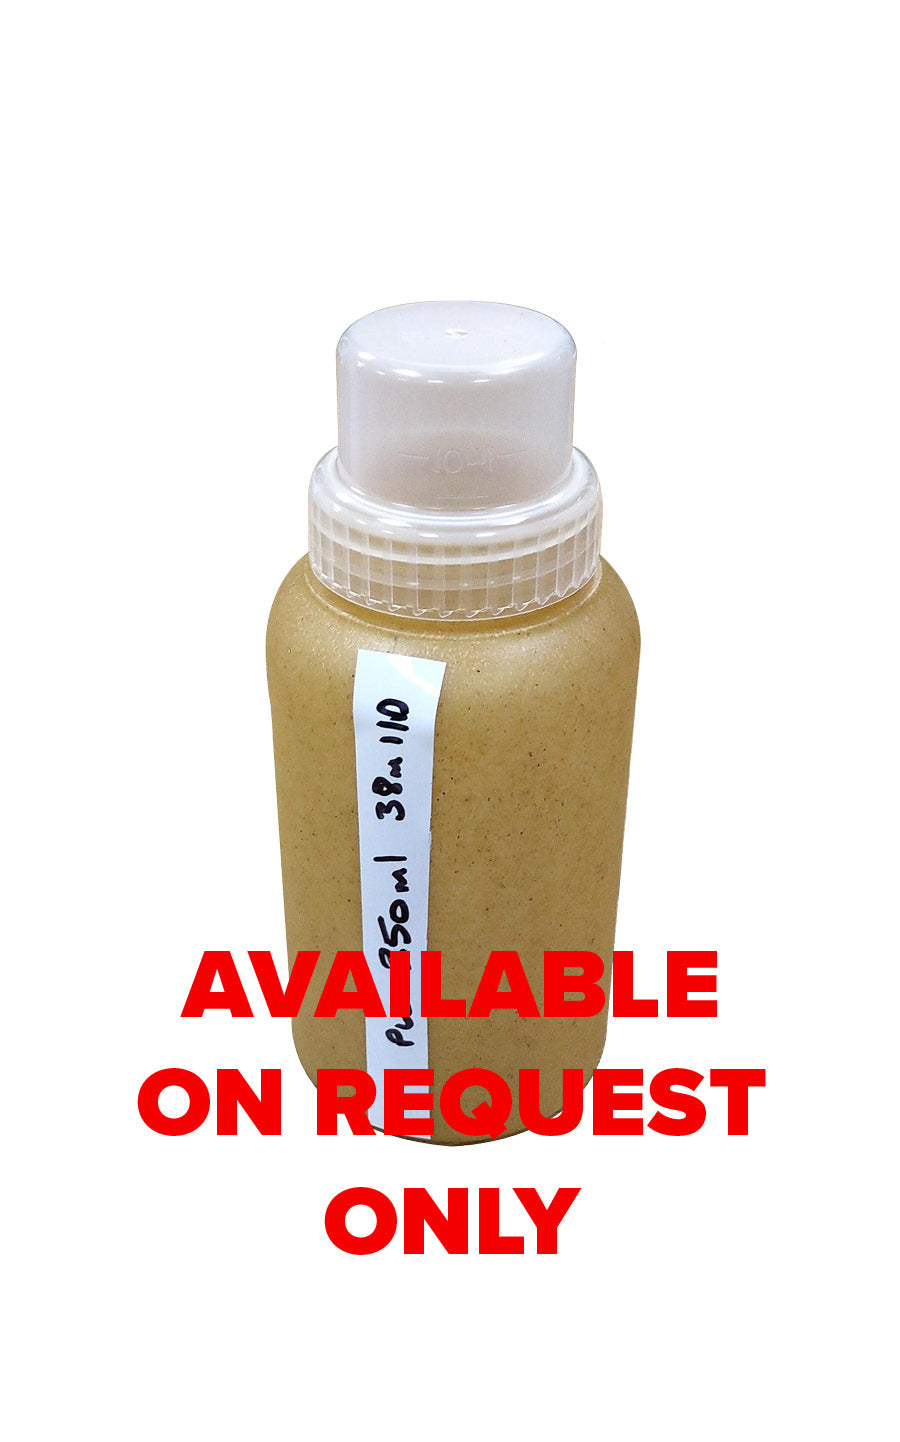 250ml round bottle (FP/622) Available on request only